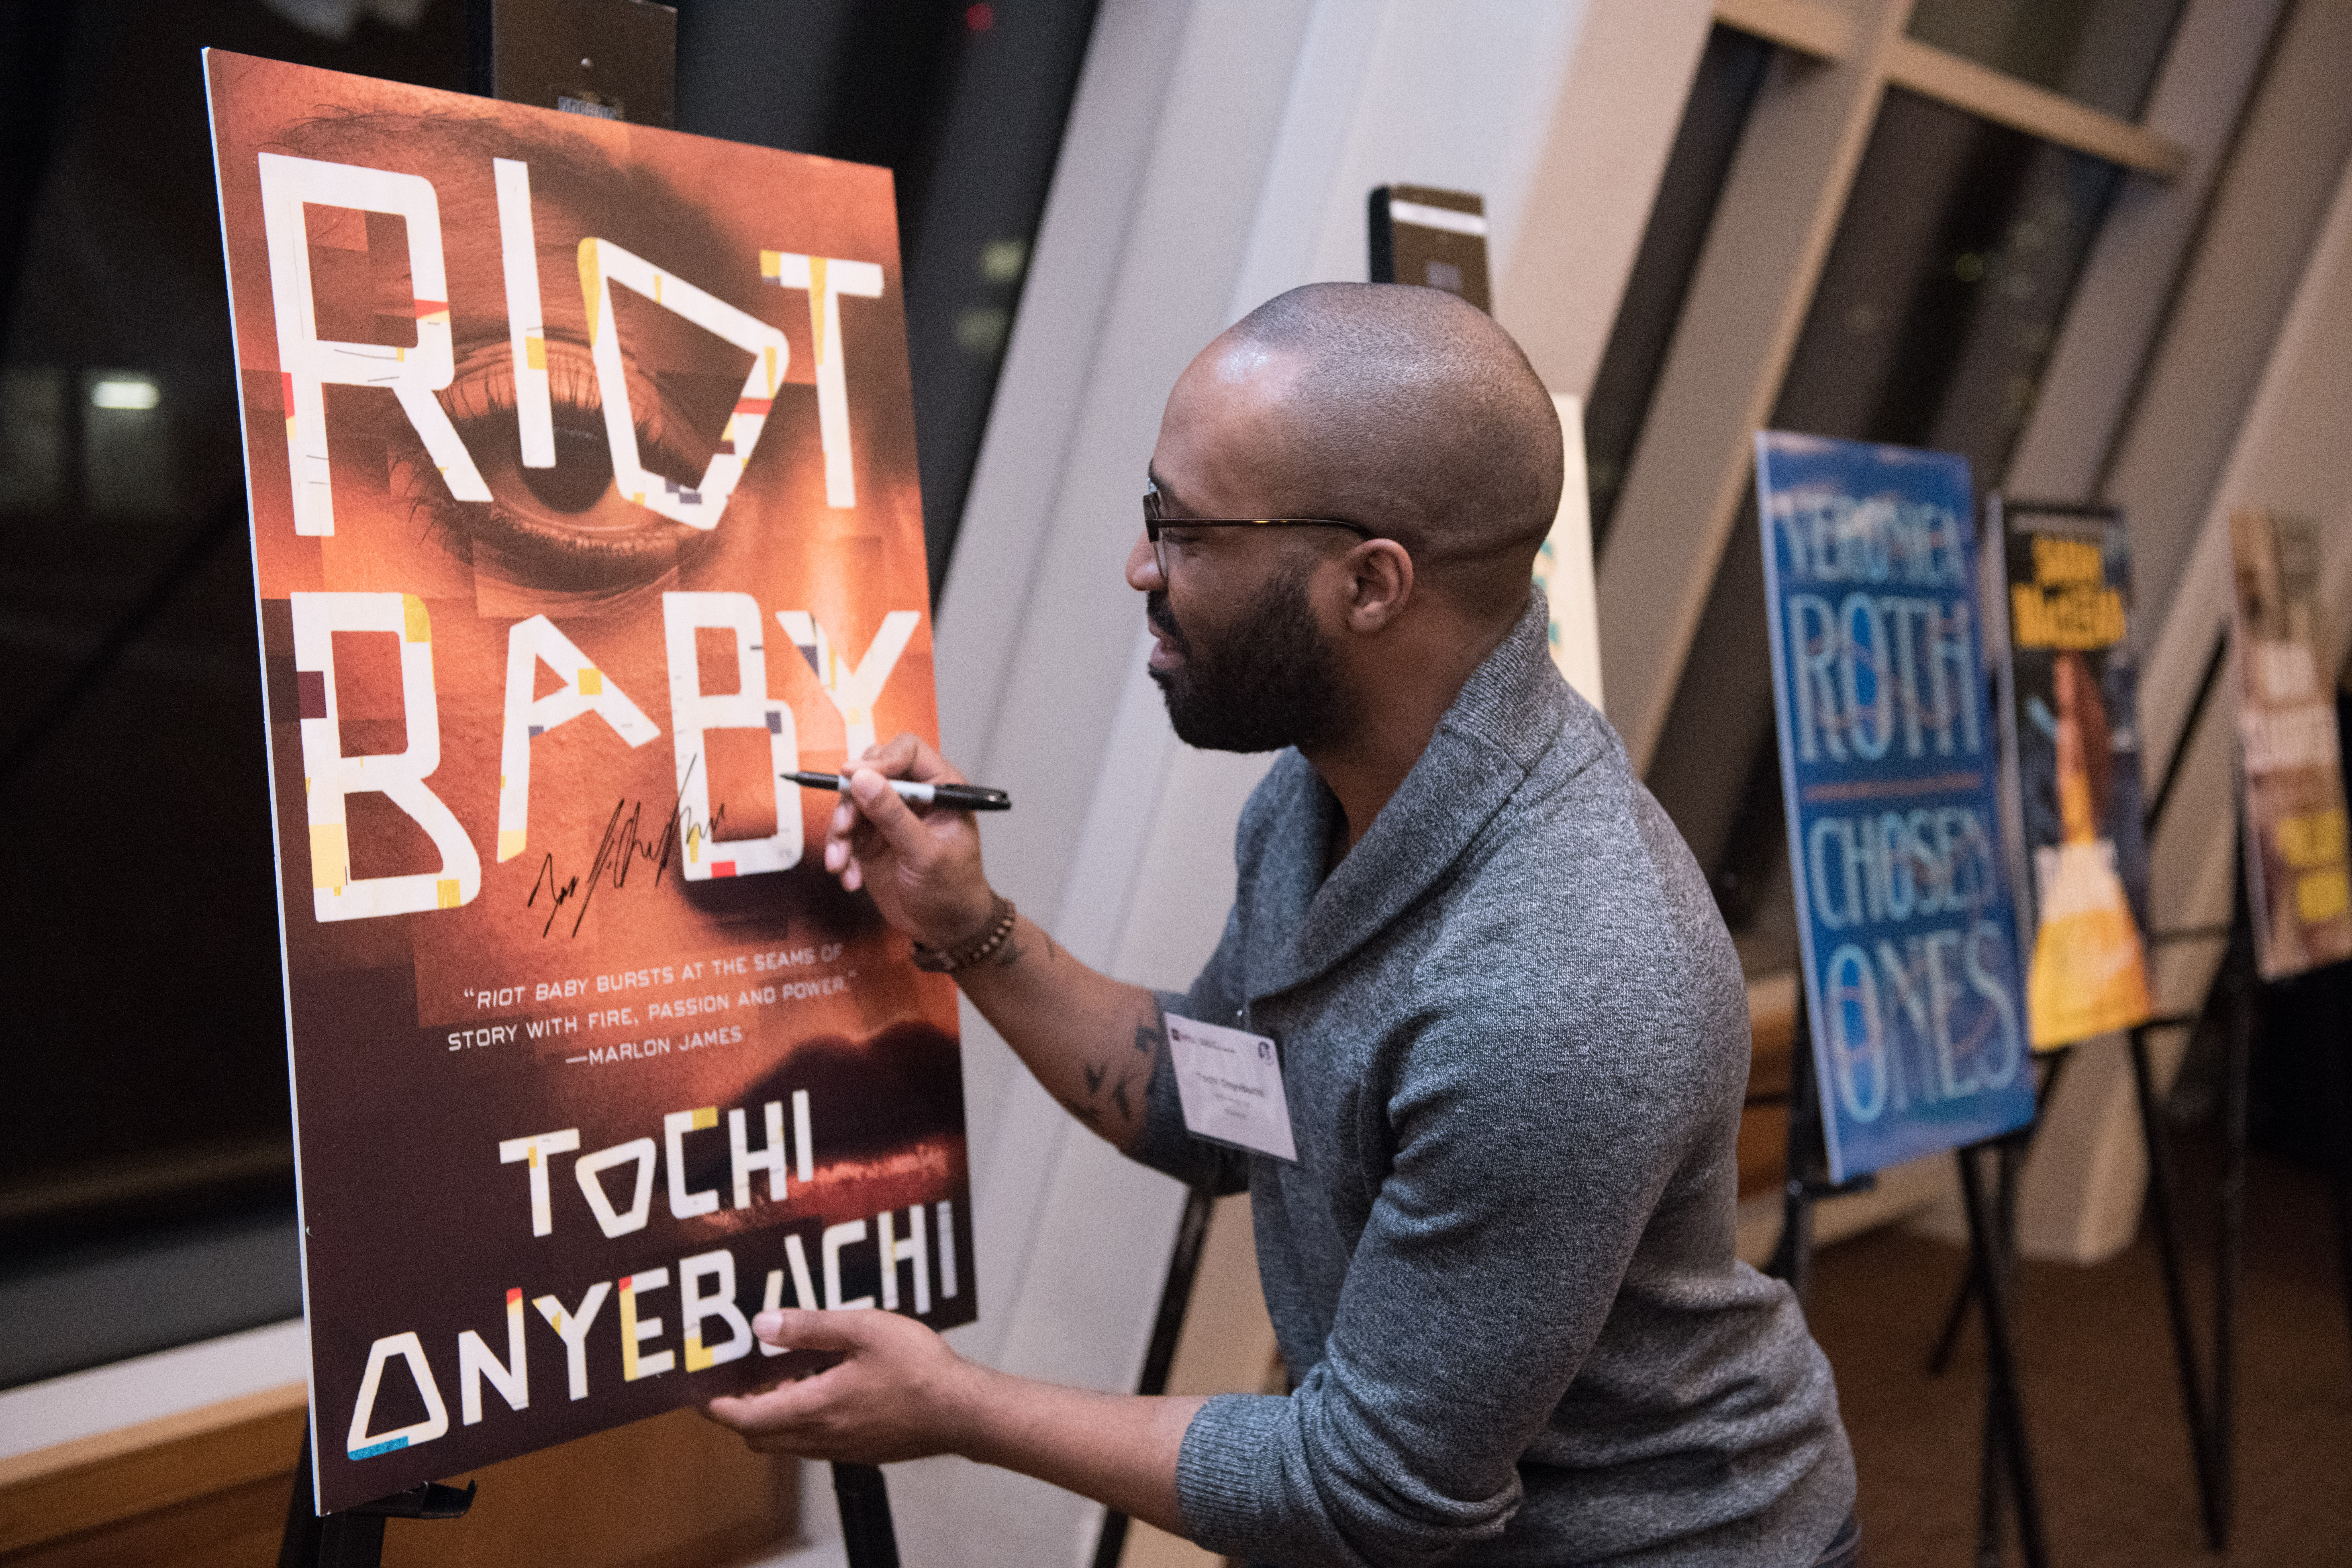 Author Tochi Onyebuchi signs a poster of his book cover (Riot Baby)